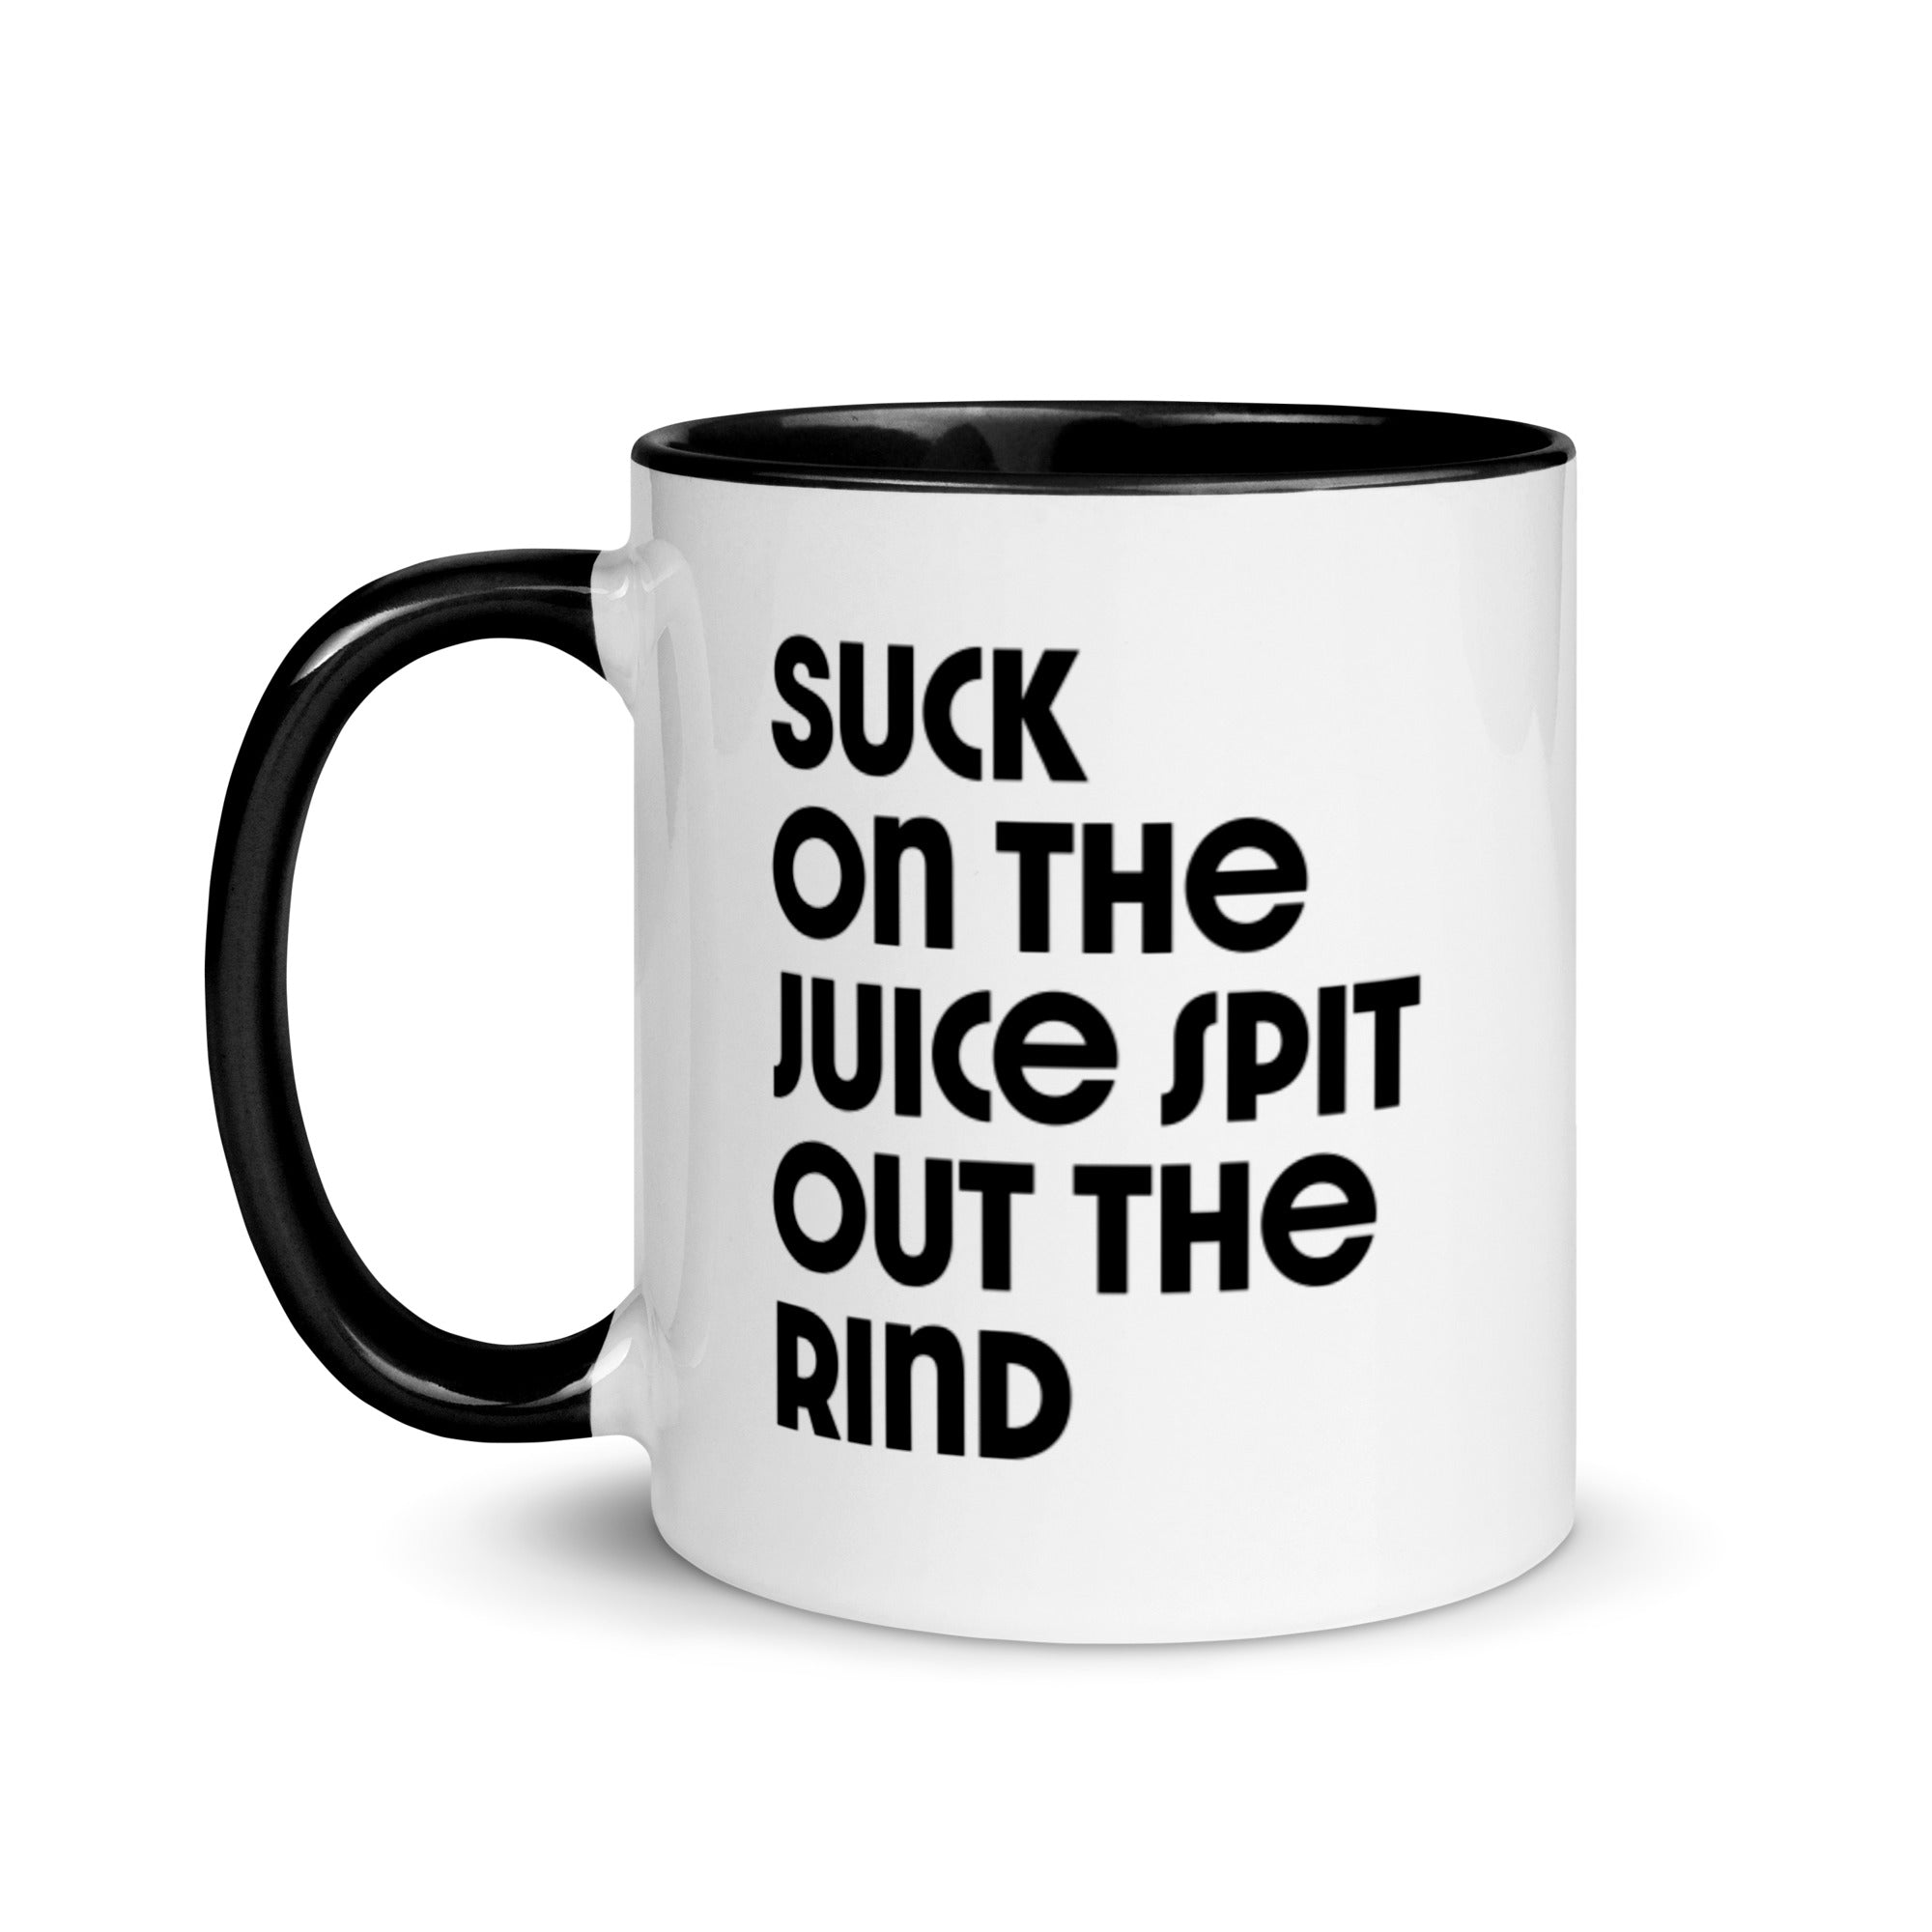 Suck on the Juice Spit out the Rind Mug